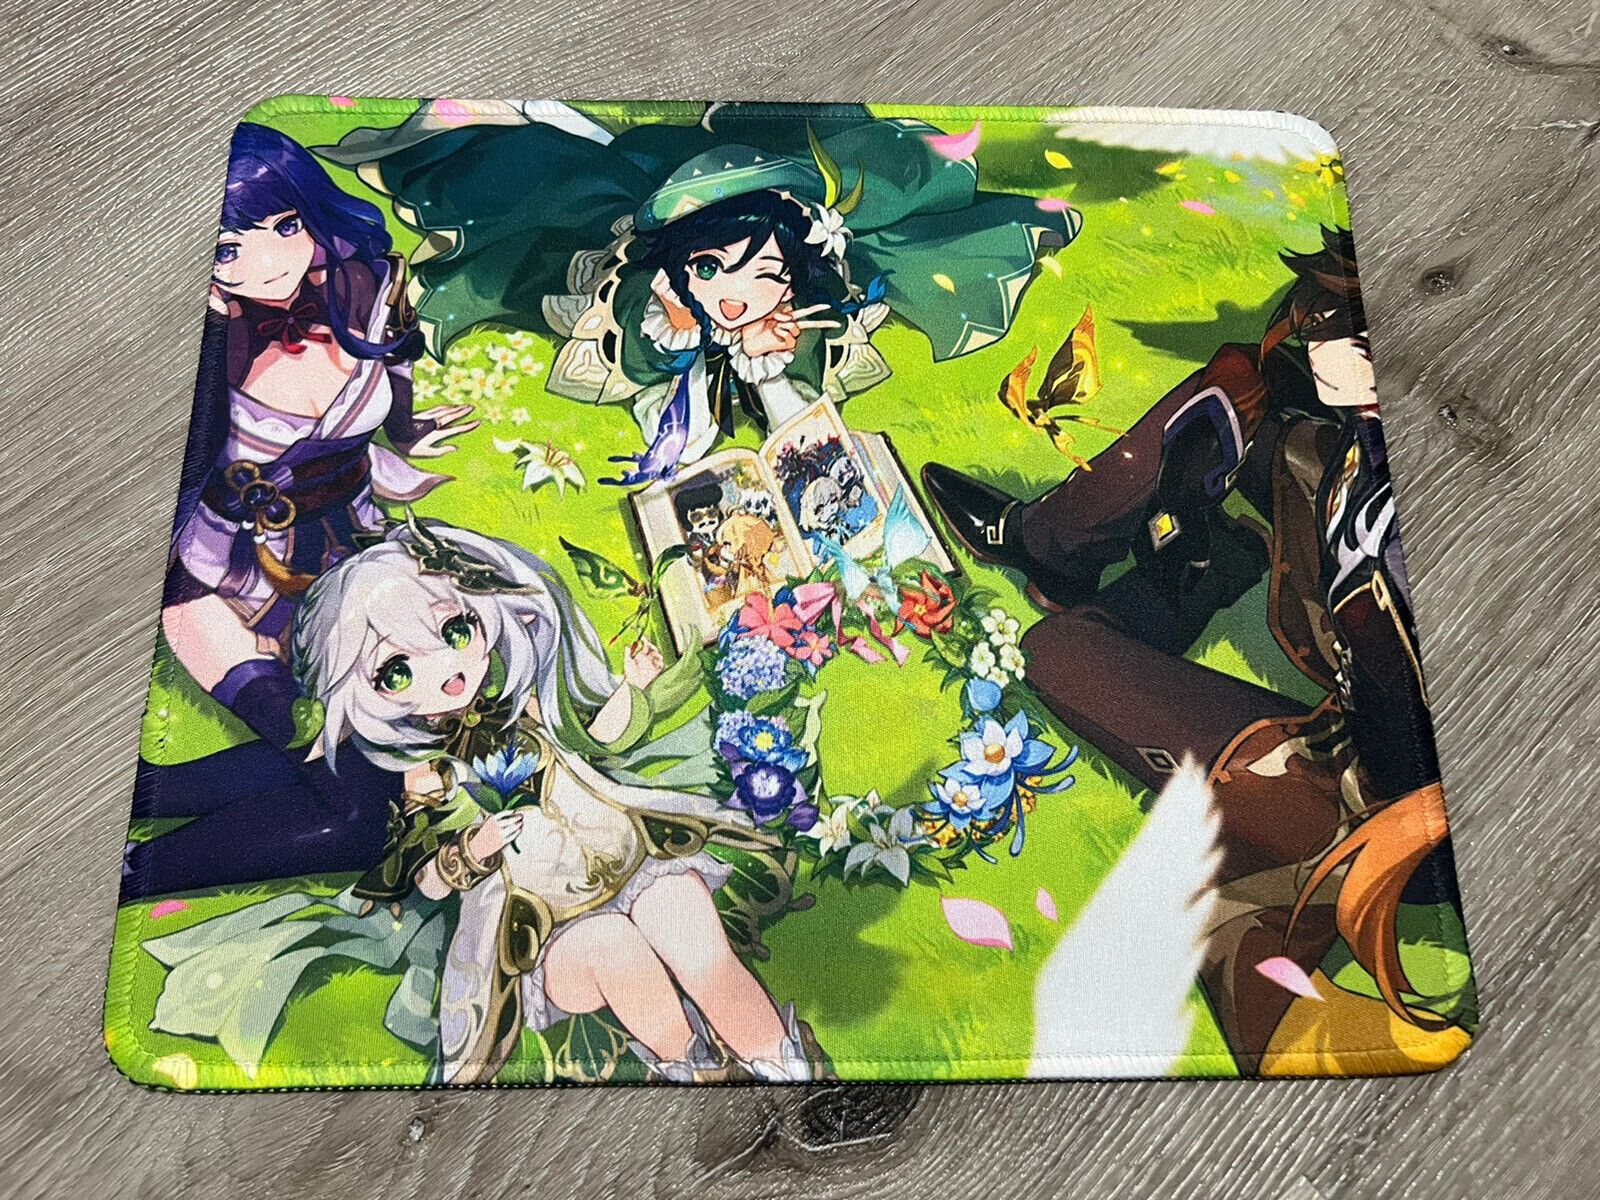 Anime genshin impact mouse pad game mouse pad keyboard mouse 300×250×2mm